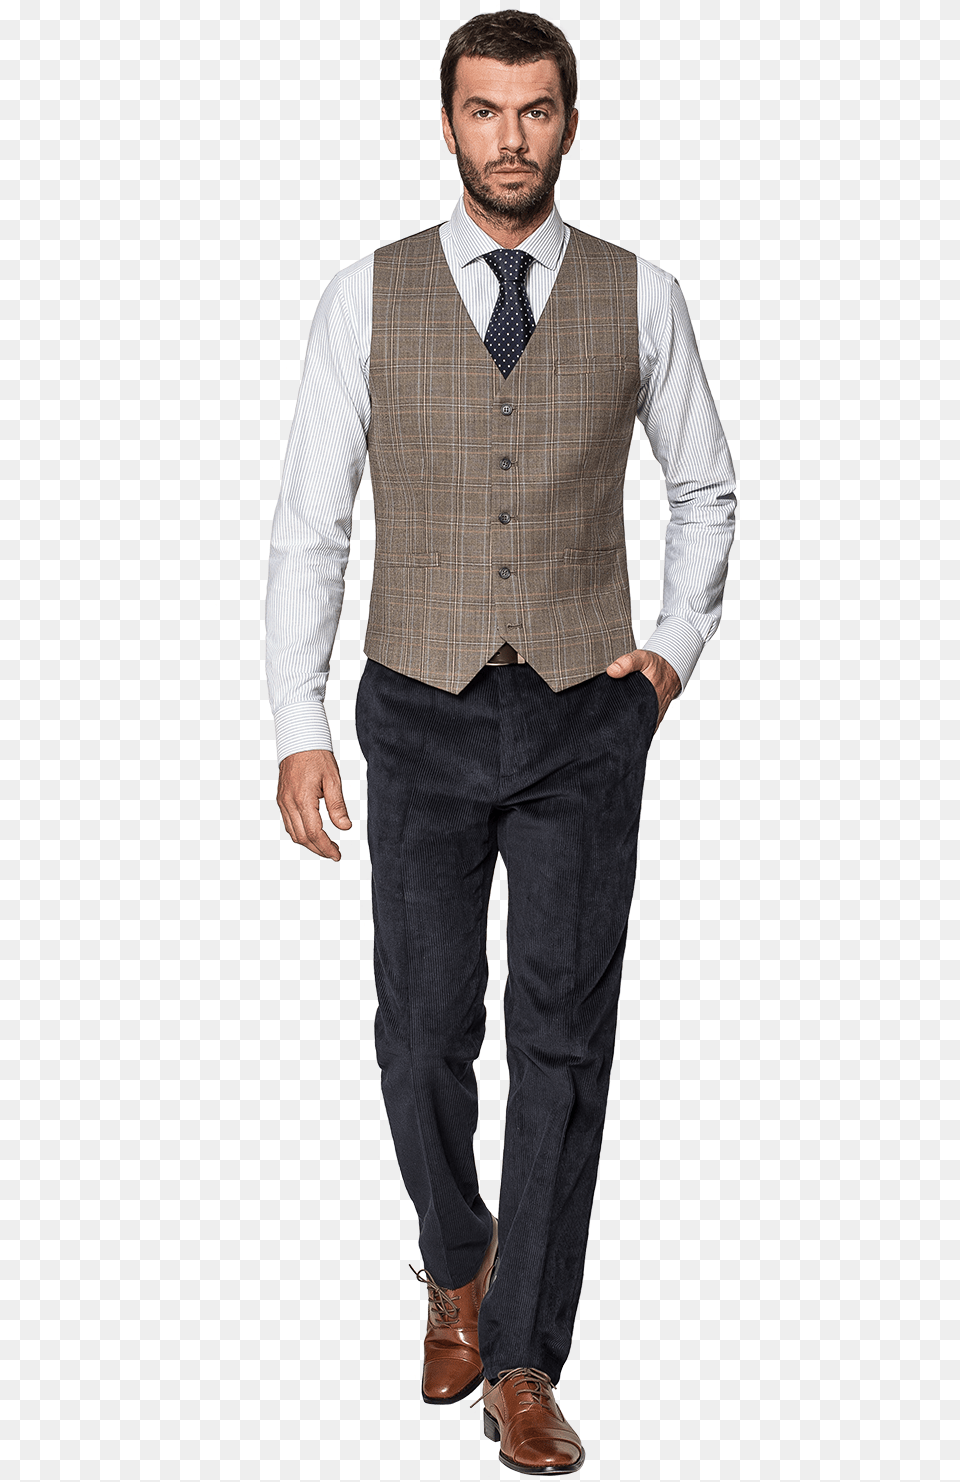 Tailored Waistcoat Clothing, Vest, Shirt, Person, Man Png Image